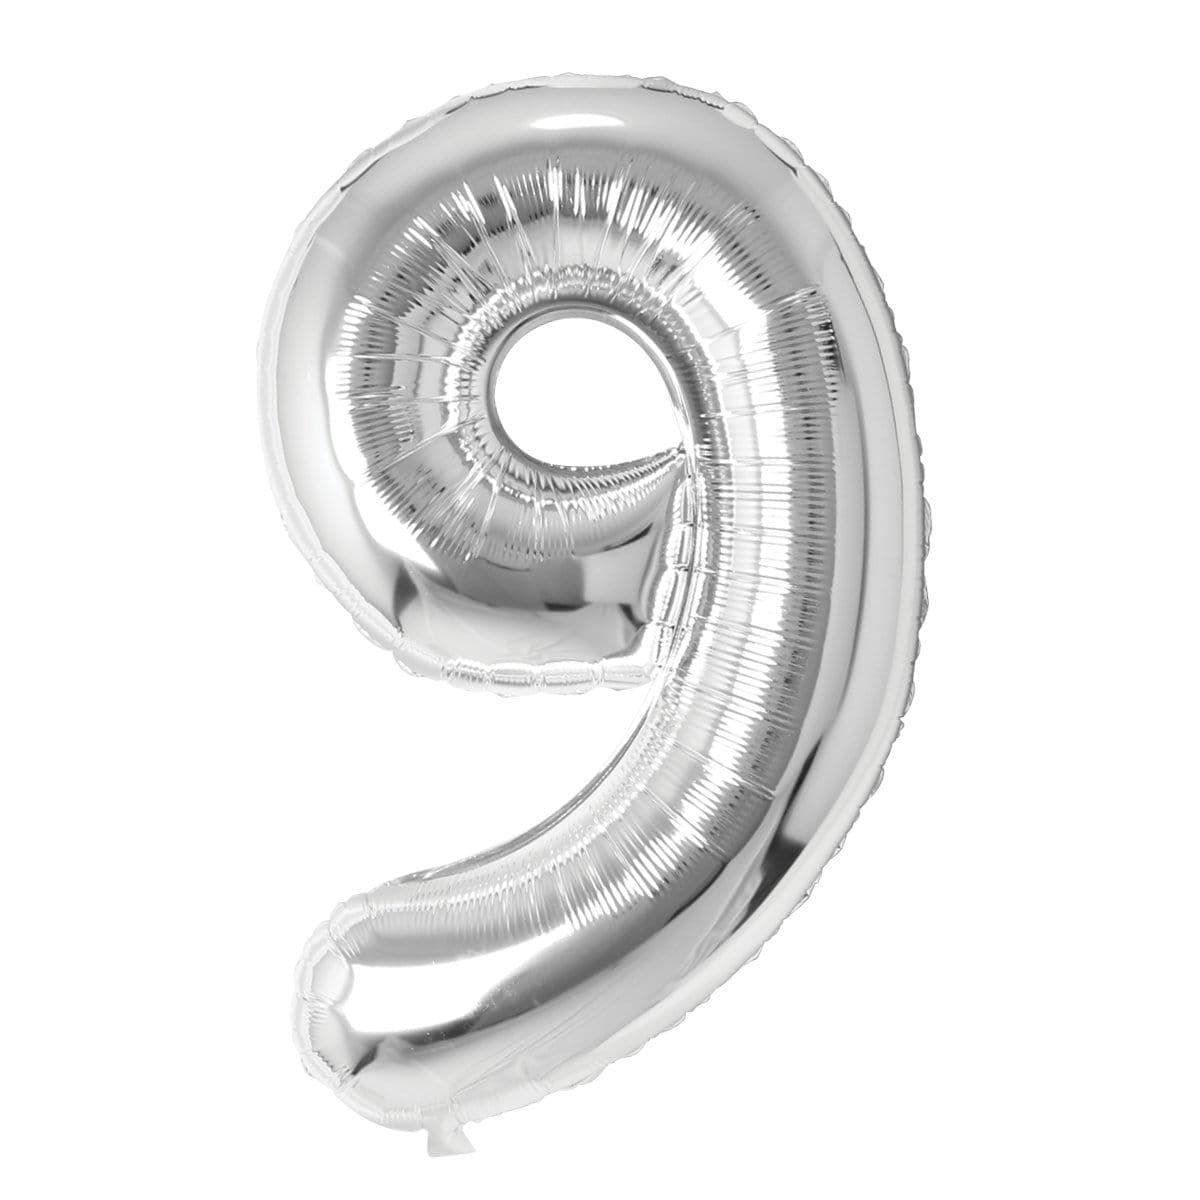 Buy Balloons Silver Number 9 Foil Balloon, 34 Inches sold at Party Expert